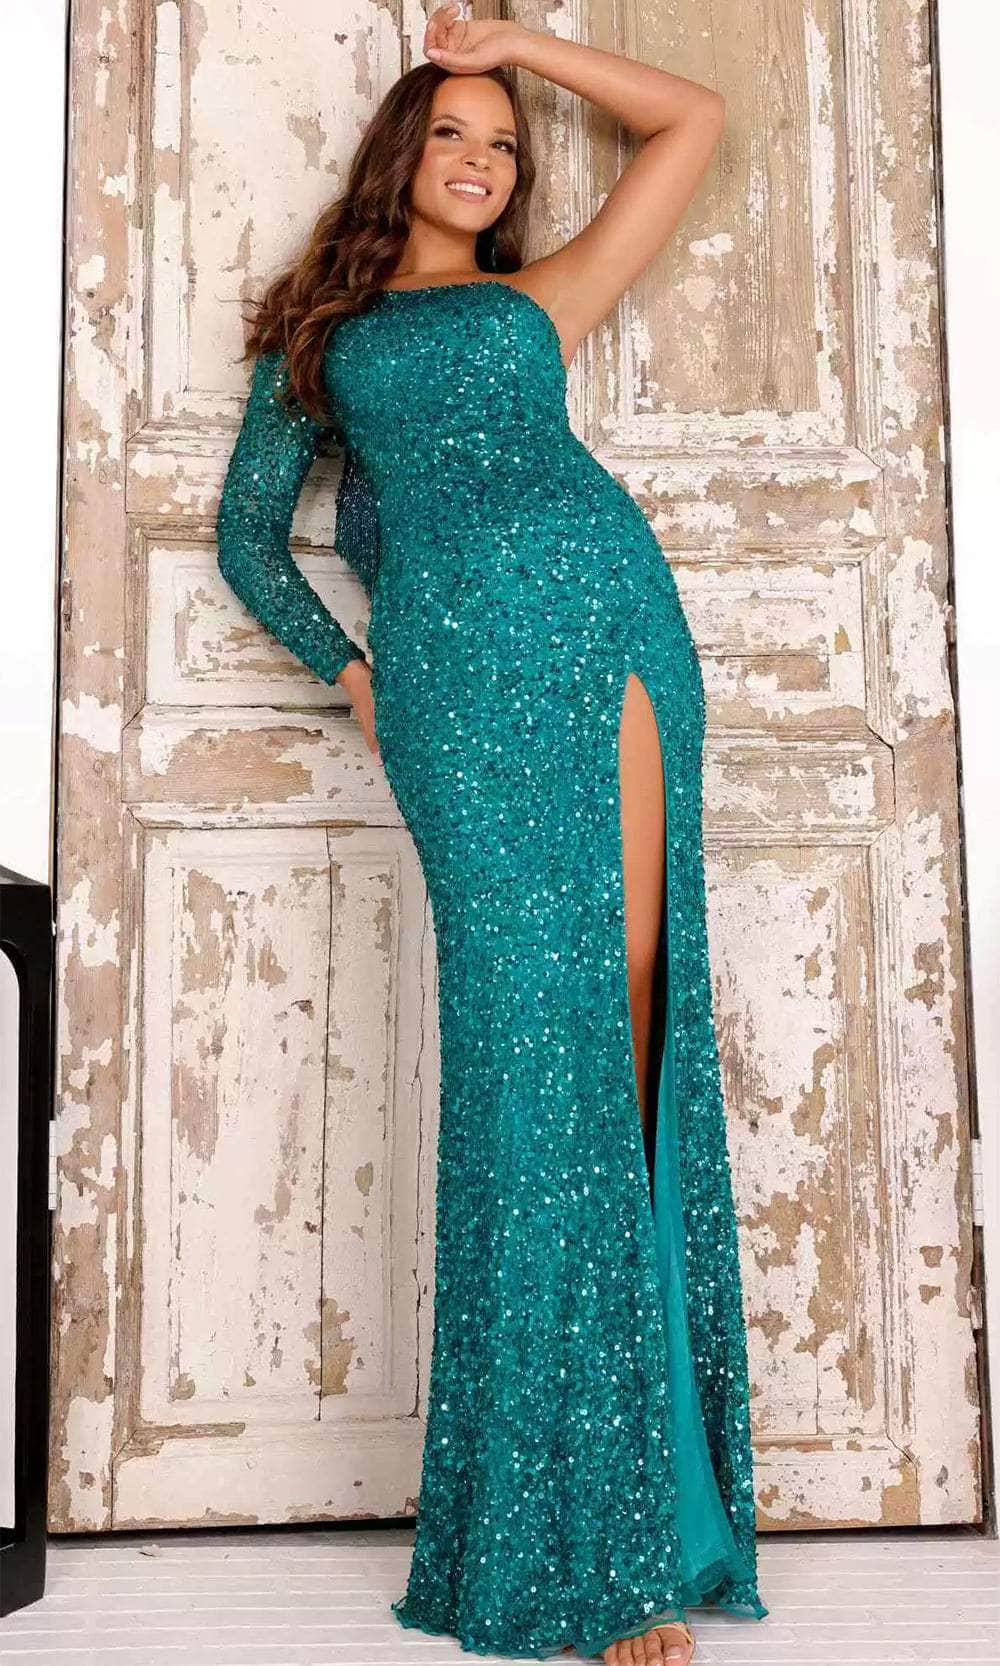 Image of Aleta Couture 881 - Long Sleeve Sequin Embellished Prom Gown